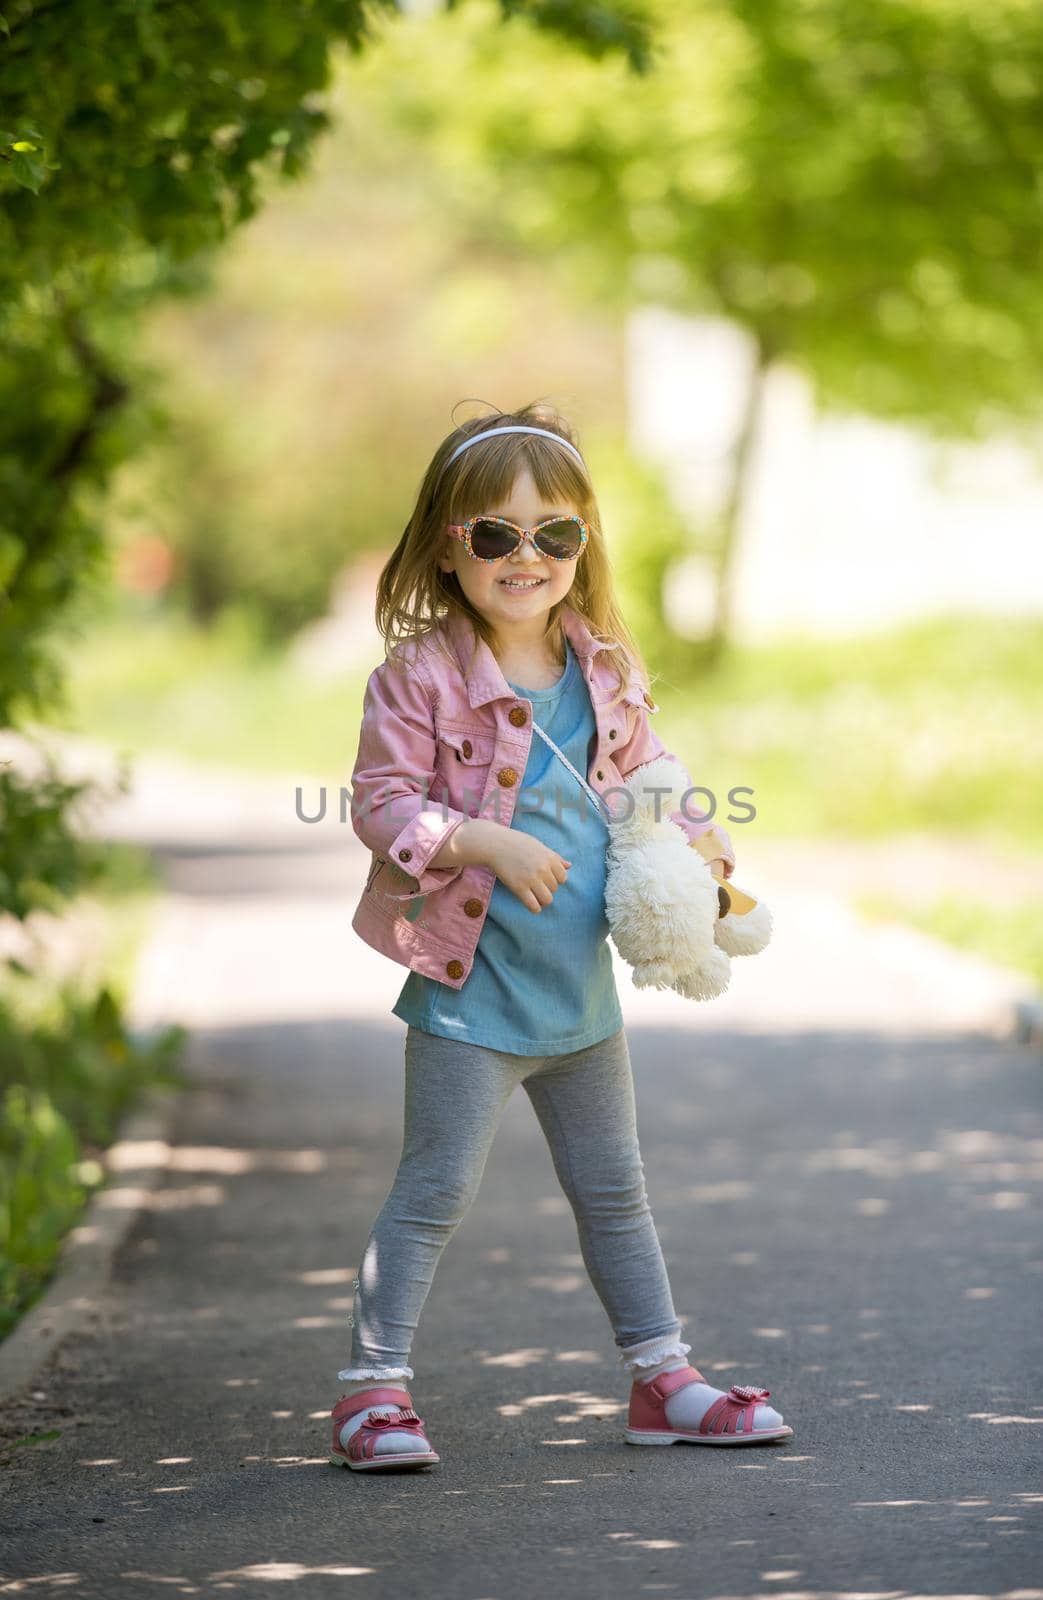 smiling little girl with sunglasses in park by tan4ikk1